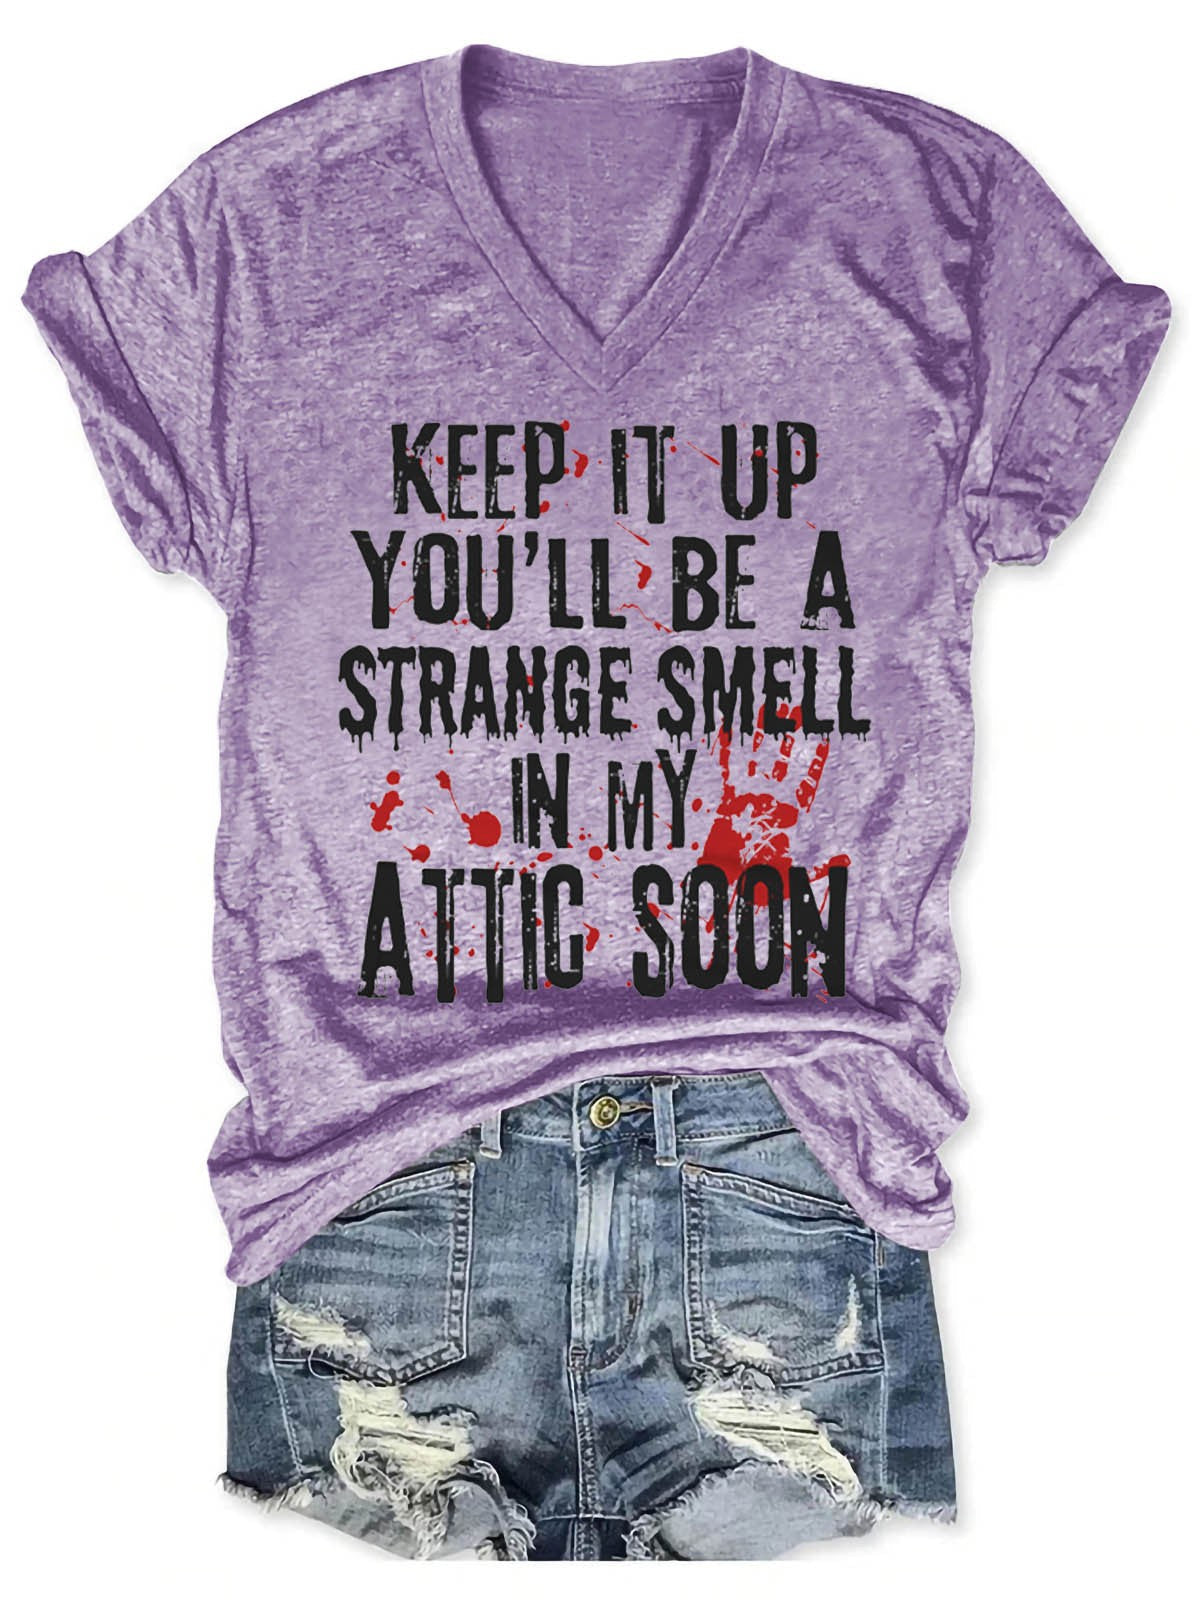 Women's Keep It Up And You'll Be A Strange Smell In The Attic Soon V-Neck T-Shirt - Outlets Forever